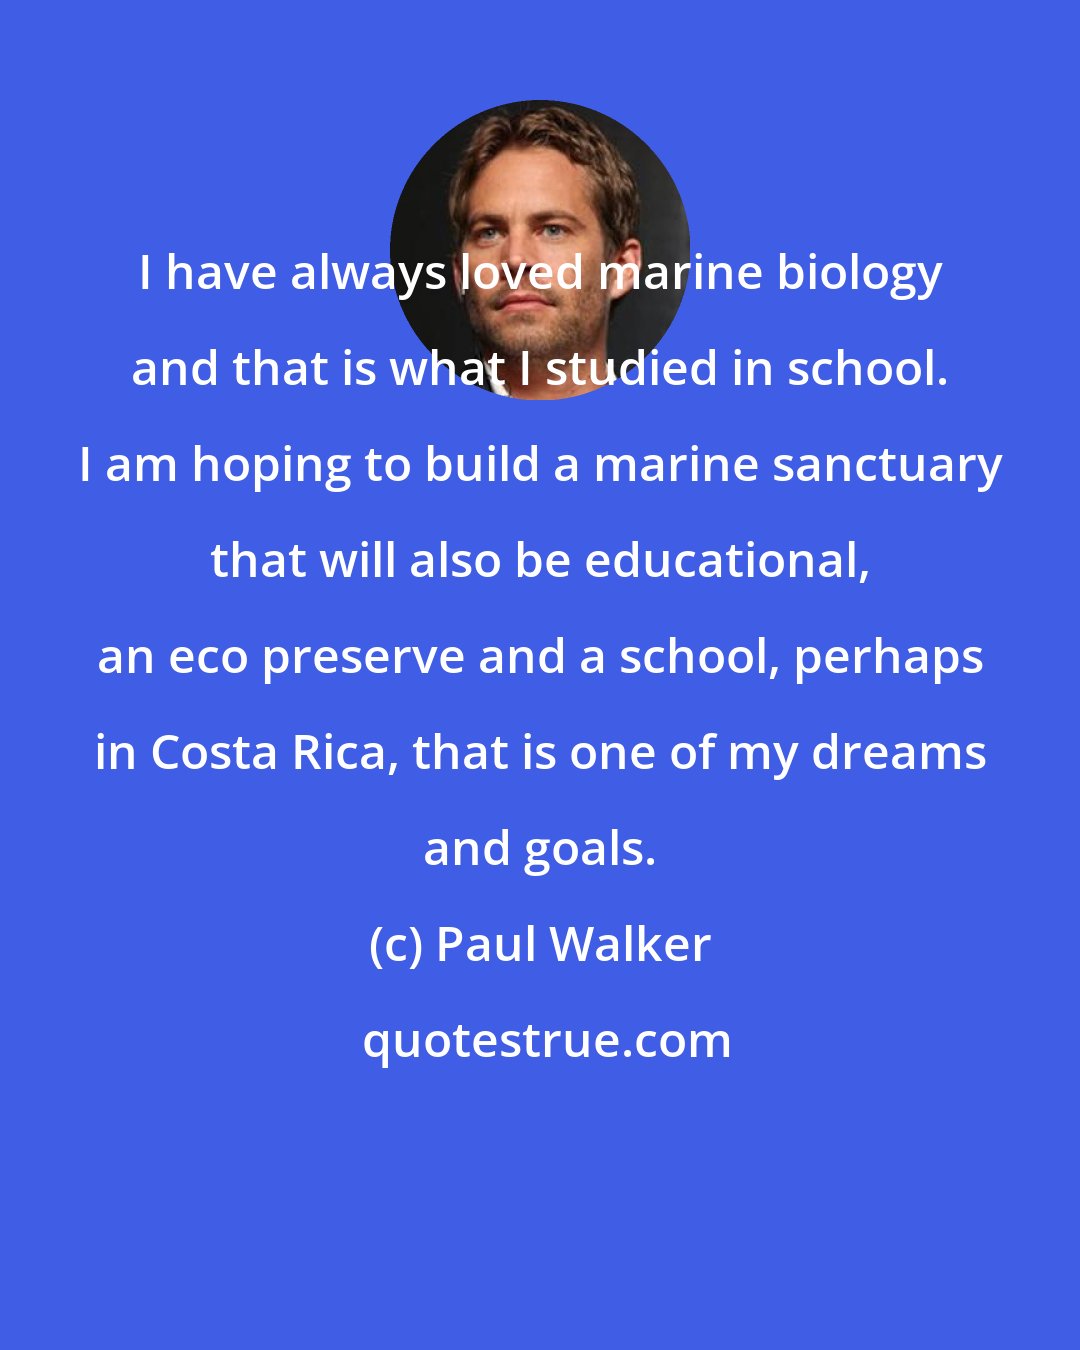 Paul Walker: I have always loved marine biology and that is what I studied in school. I am hoping to build a marine sanctuary that will also be educational, an eco preserve and a school, perhaps in Costa Rica, that is one of my dreams and goals.